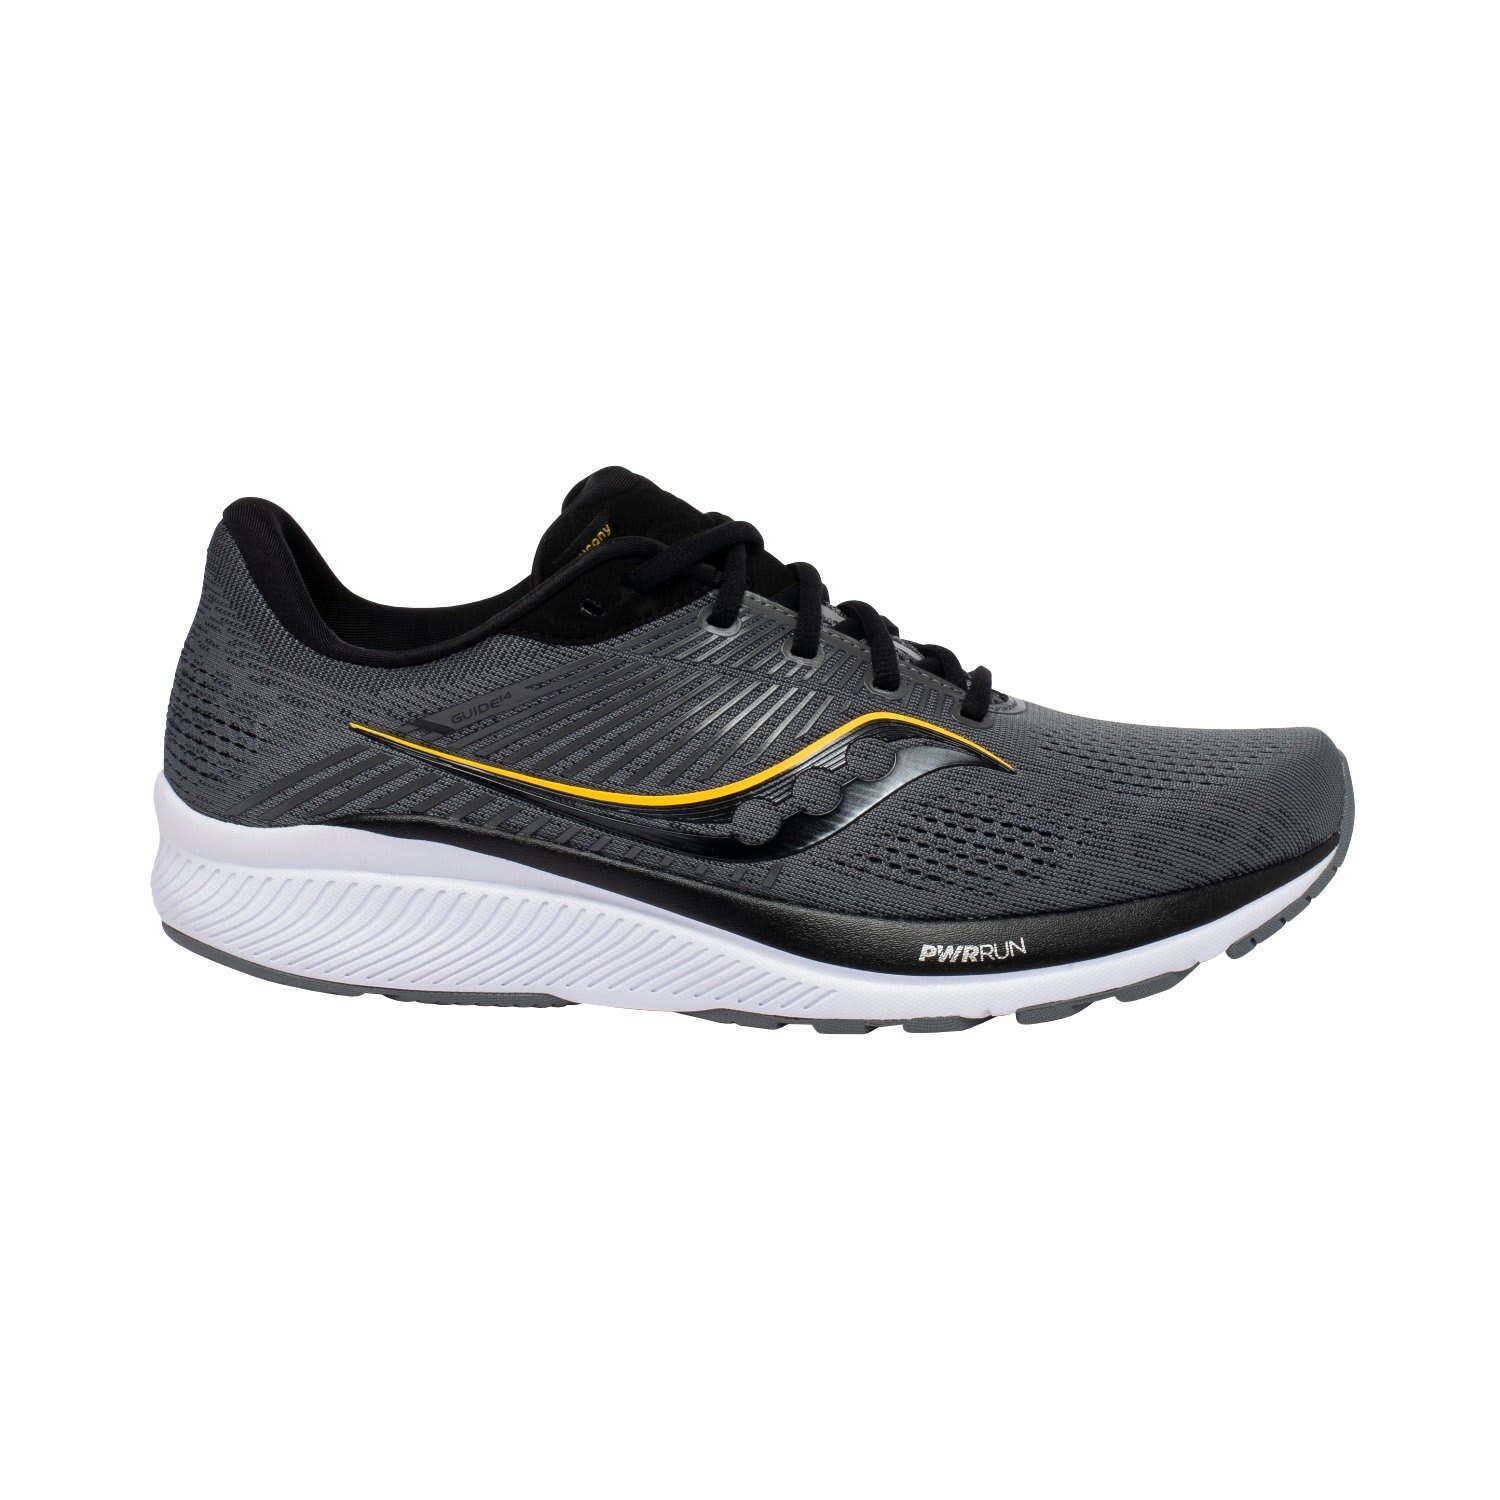 Saucony Men's Guide 14 Road Running Shoes | Sportsmans Warehouse